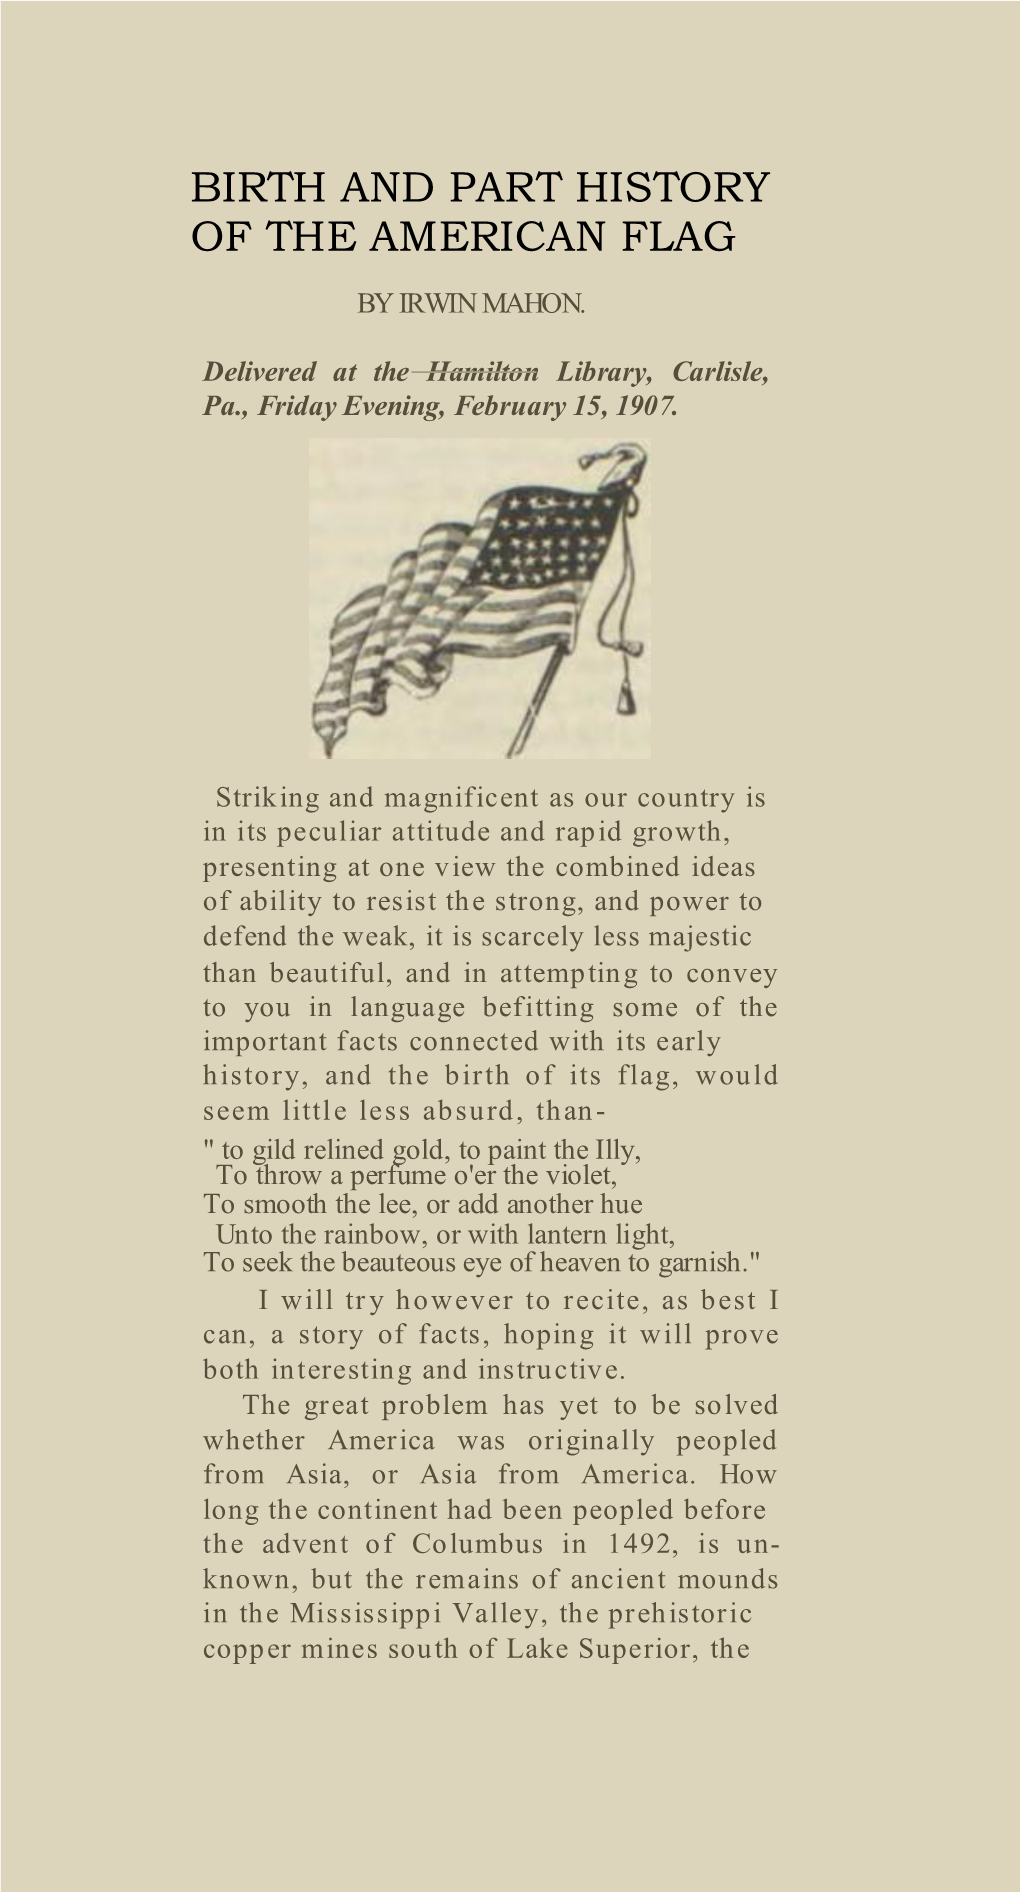 Birth and Part History of the American Flag